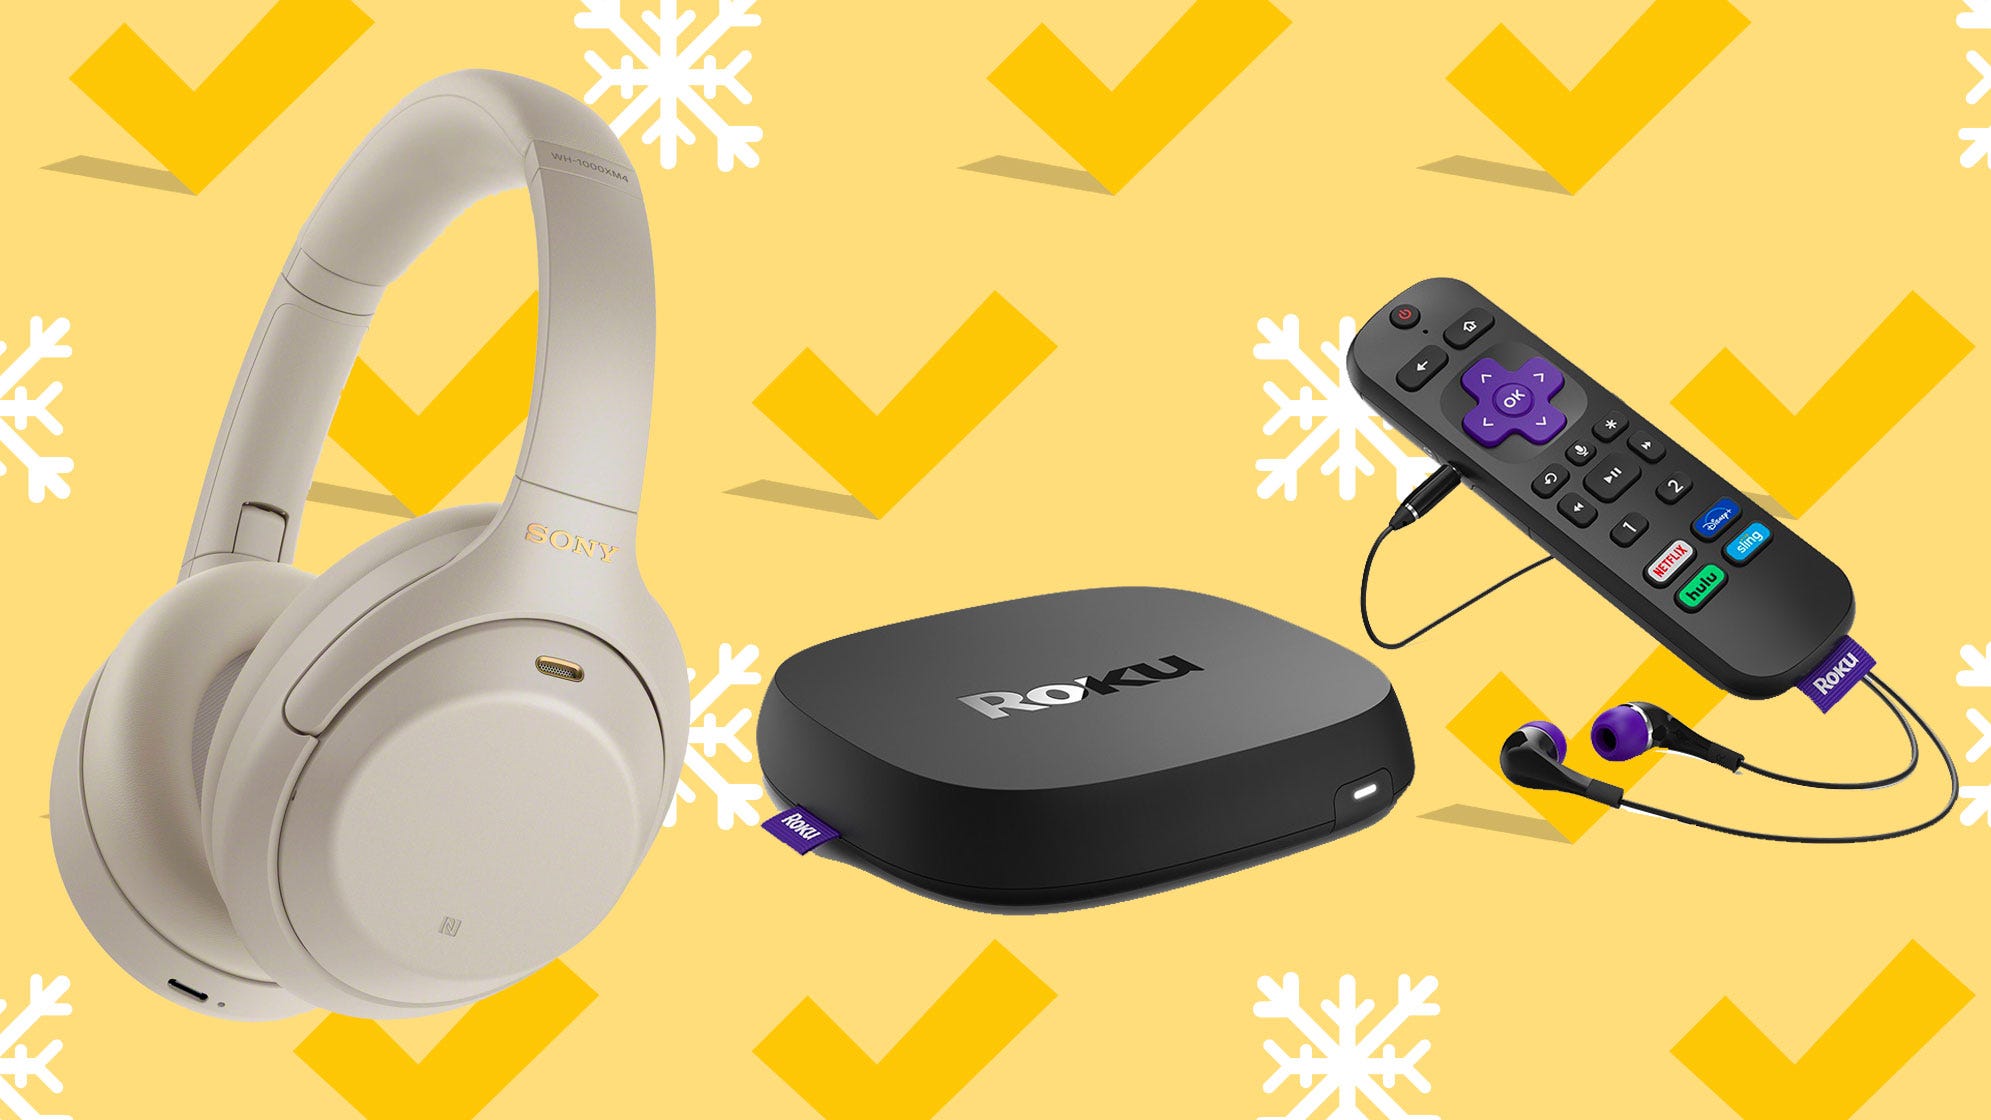 Black Friday 2020: The top Best Buy deals right now